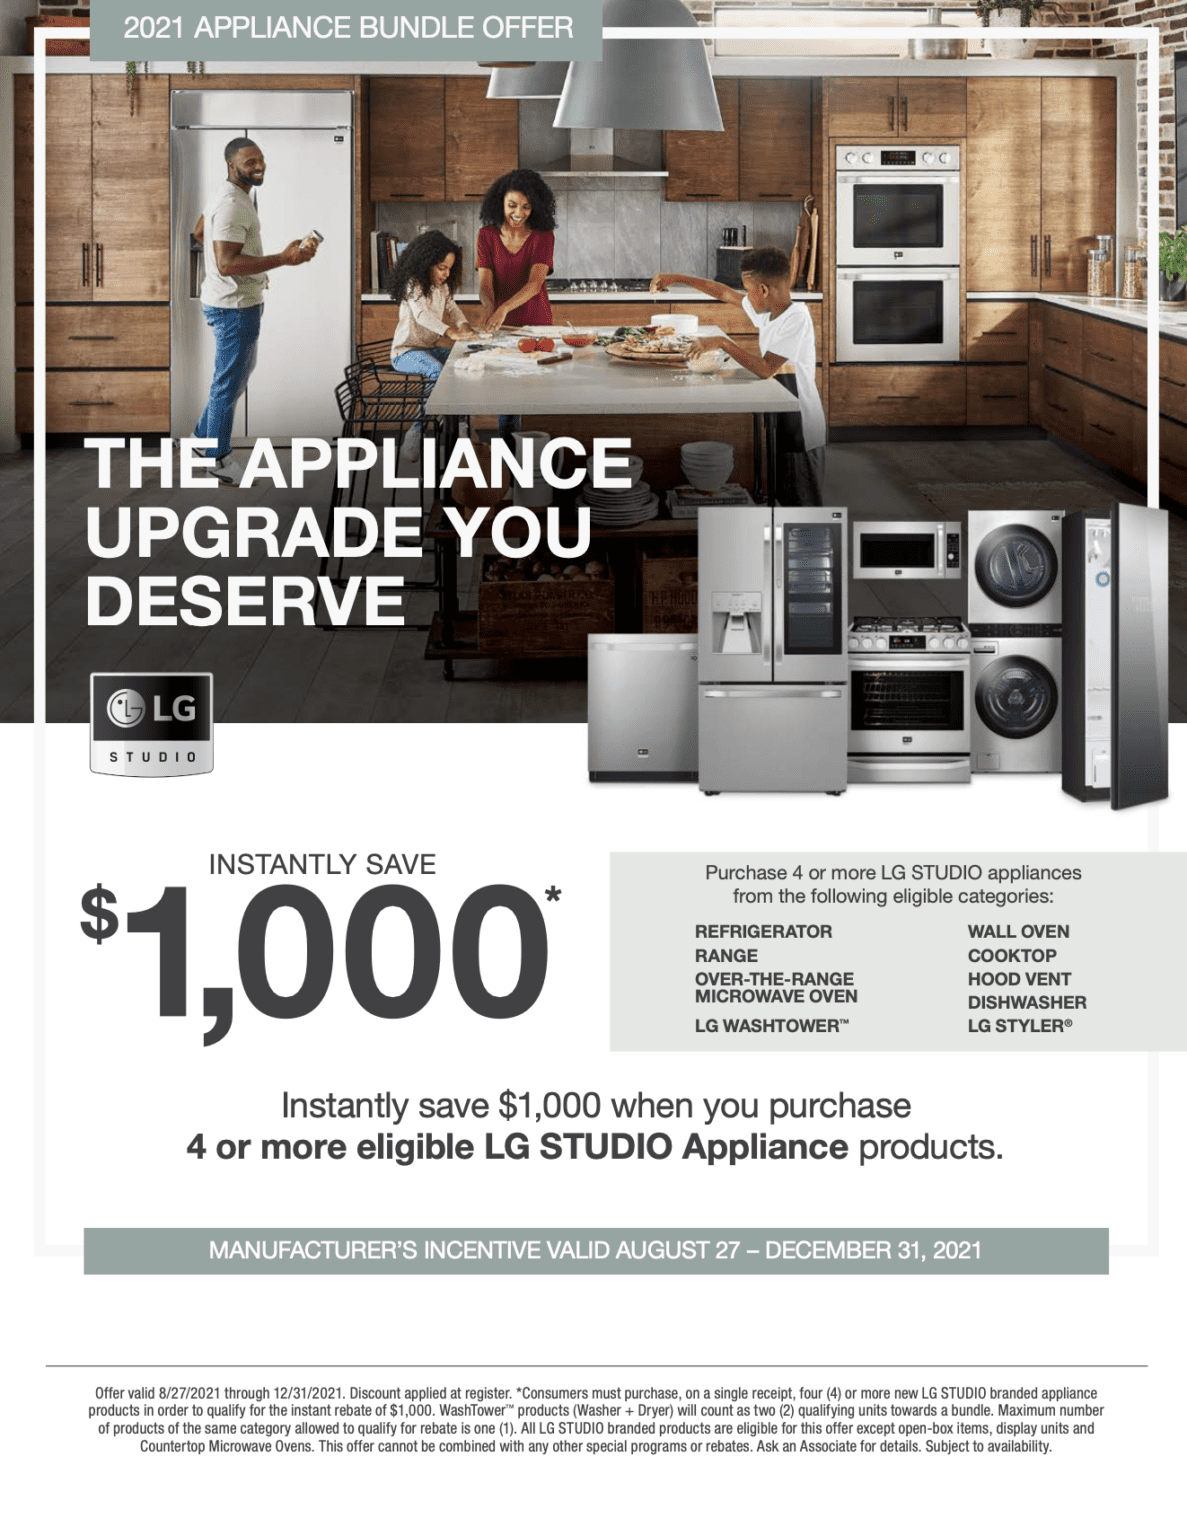 Home Depot Rebate For Home Appliances 1187x1536 